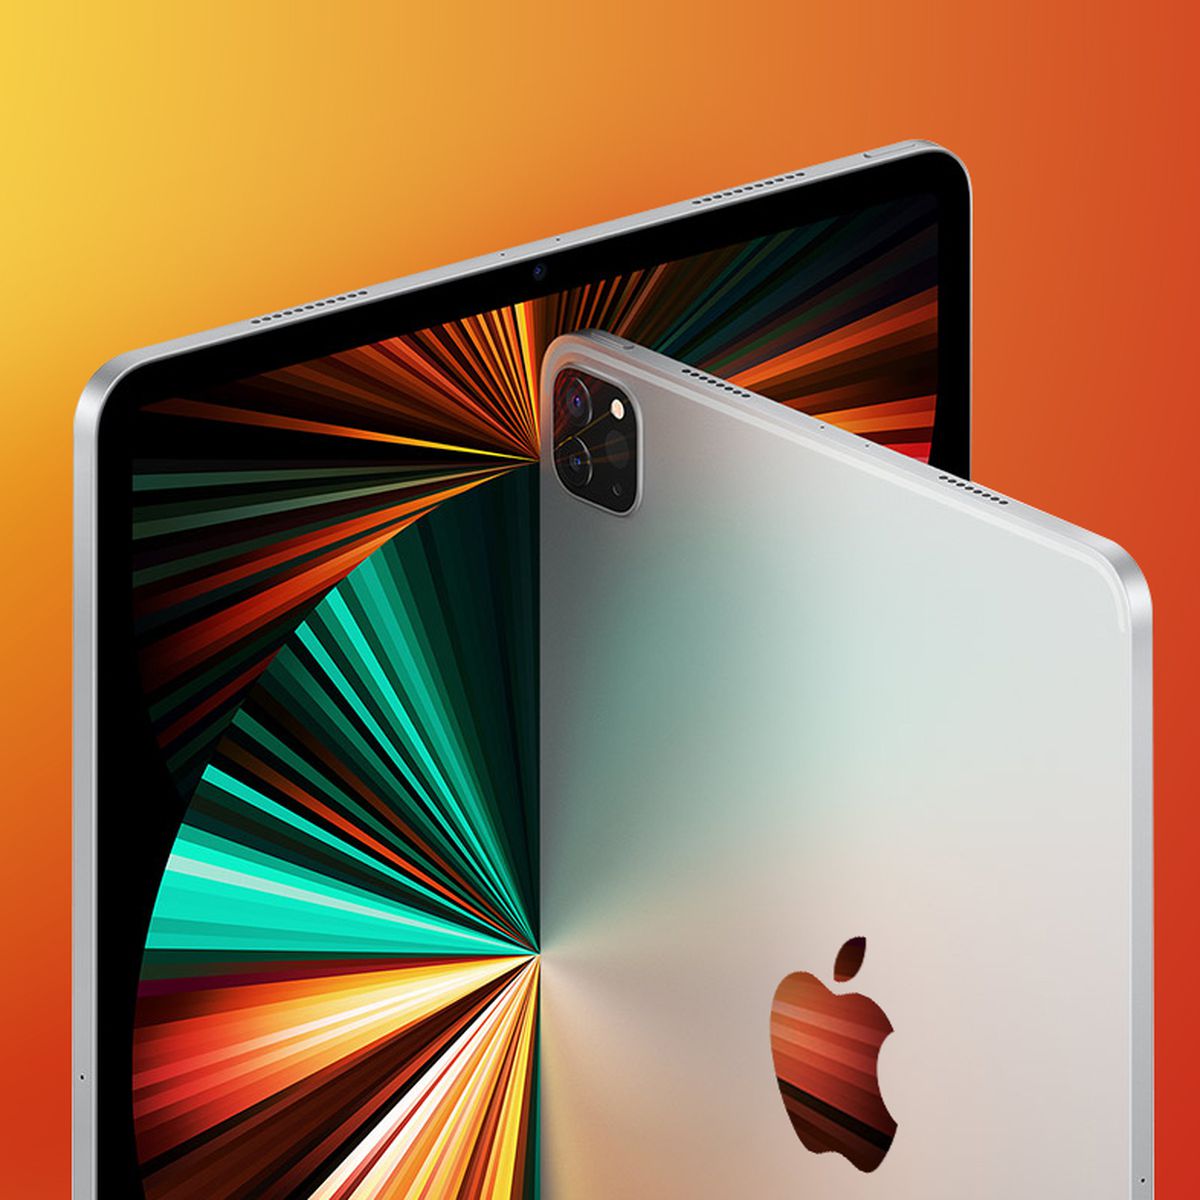 Gurman: New iPads and Macs Likely to Launch in Late March - MacRumors